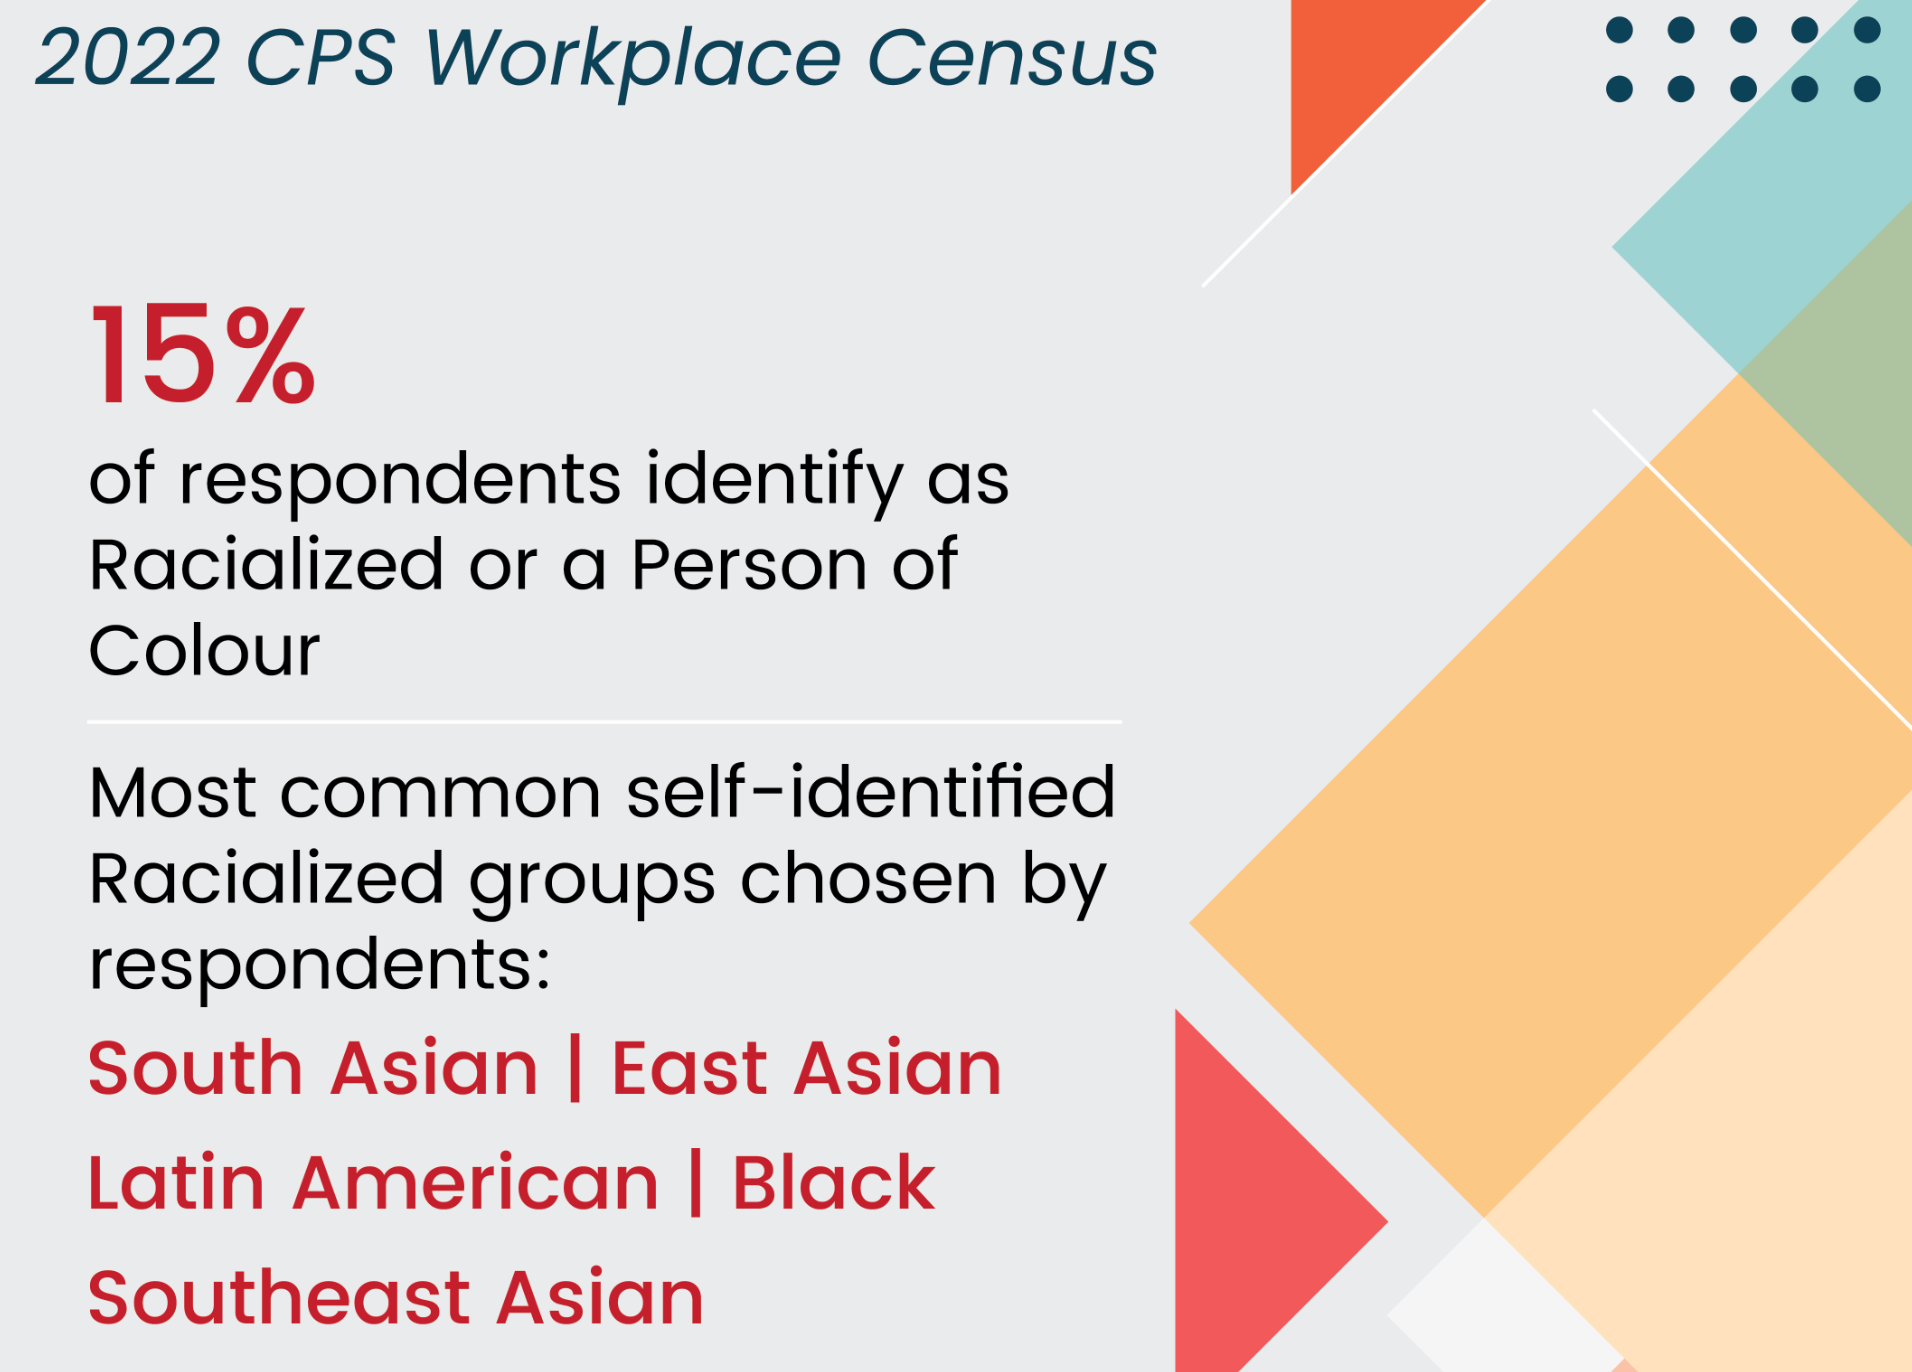 2022 CPS Workplace Census at-a-glance page: 15% of respondents identify as Racialized or a Person of Colour.